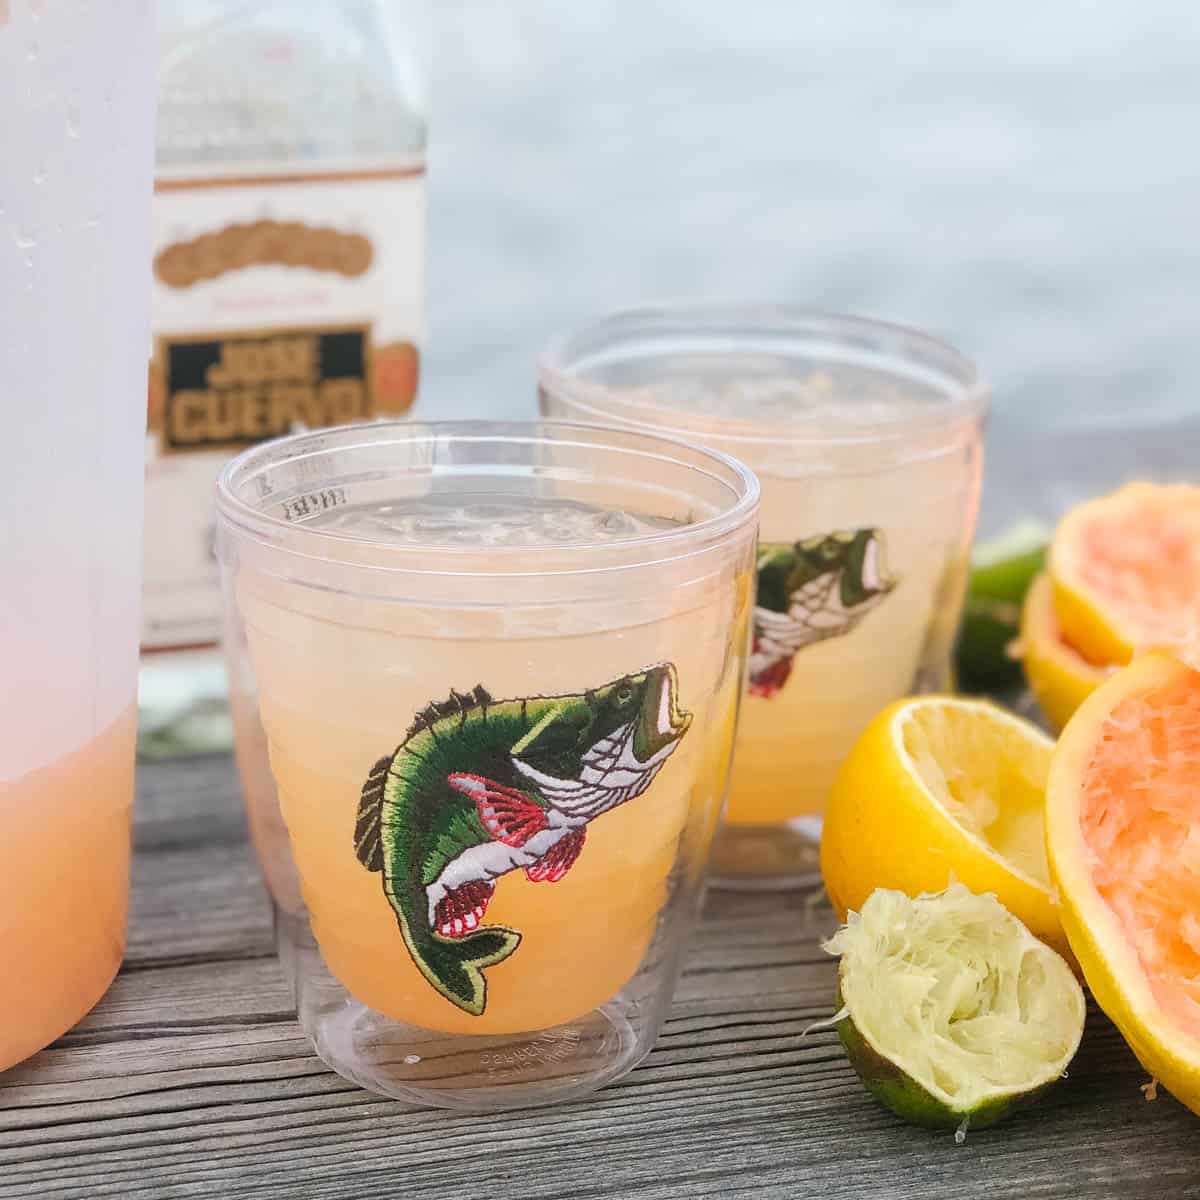 two plastic glasses with fish on them filled with grapefruit margaritas, next to lemon, lime, and grapefruits on a wooden table by the water.